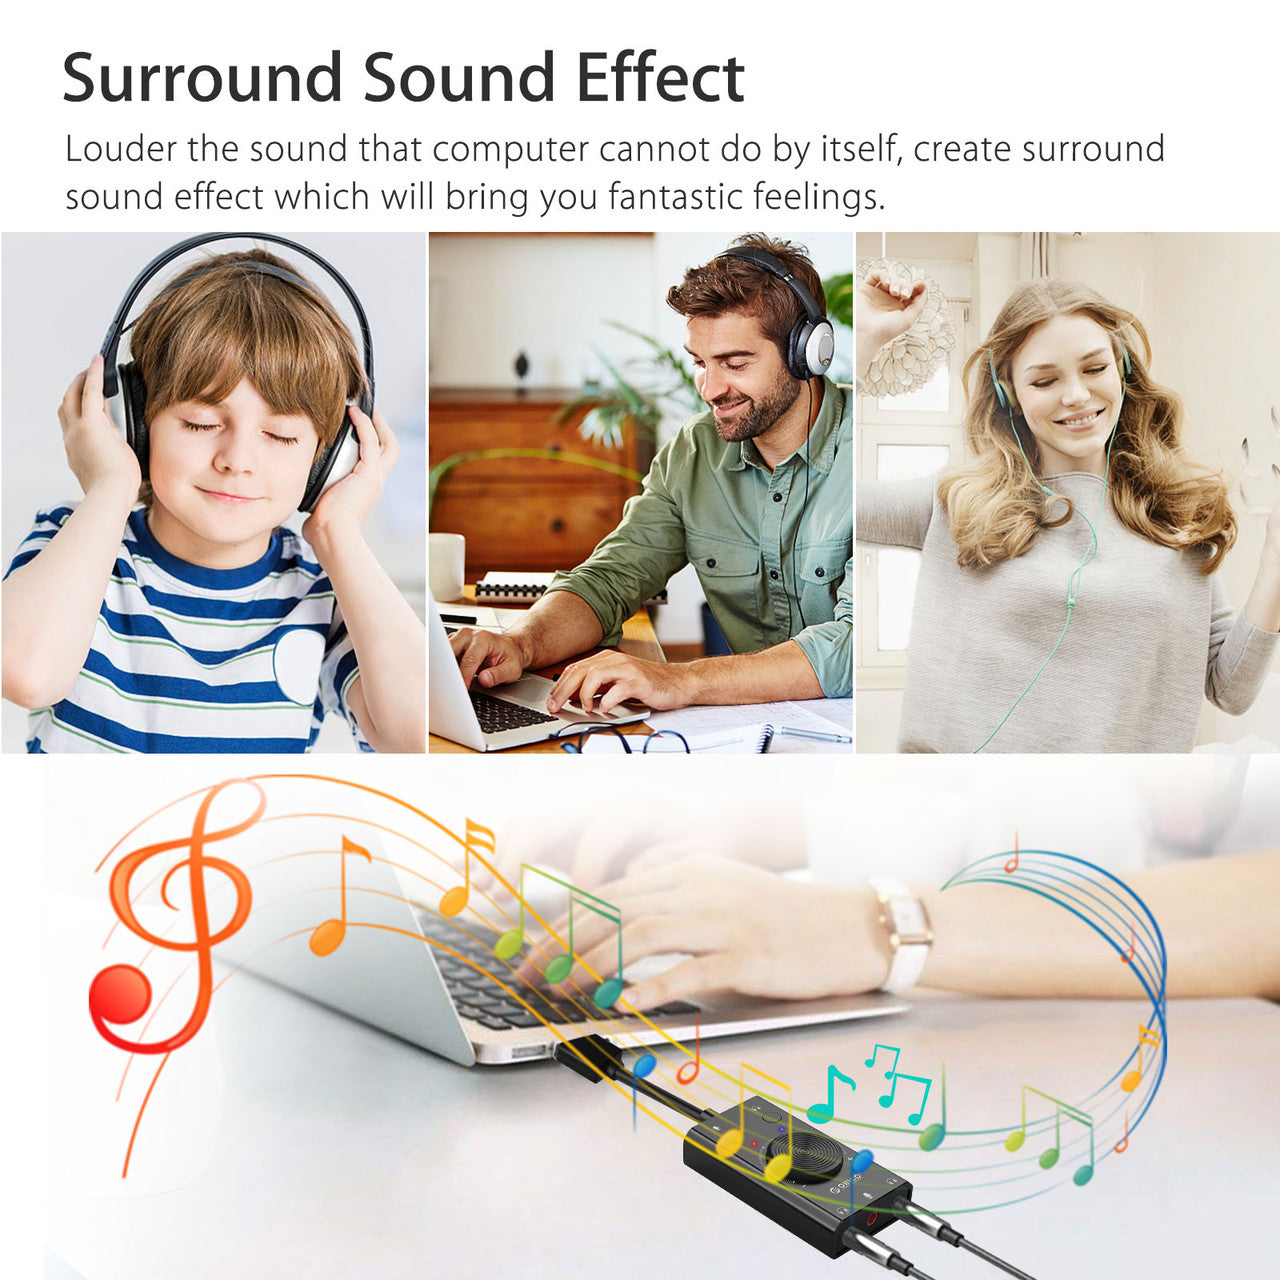 7.1 USB Sound Card Adapter, External Audio Adapter Stereo Sound Card Converter 3.5mm AUX Microphone Jack Fits for Gaming Headset Earphone PS4 Laptop Desktop Windows Mac OS Linux, Plug and Play